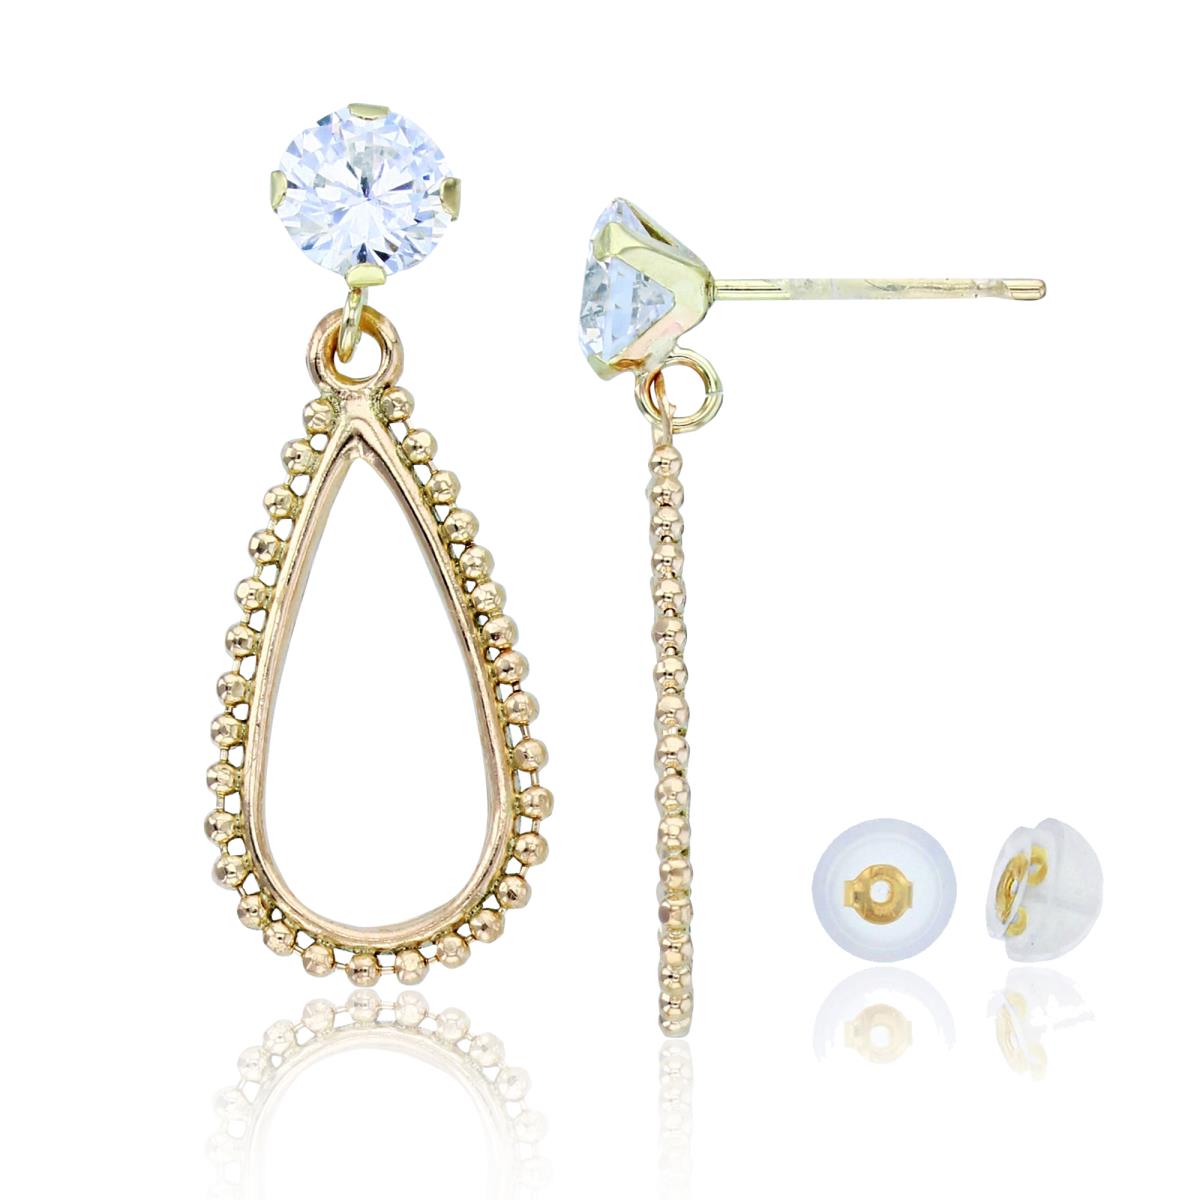 10K Yellow Gold 5mm Rnd CZ Top & Textured Open PS-Drop Dangling Earrings with Silicon Backs